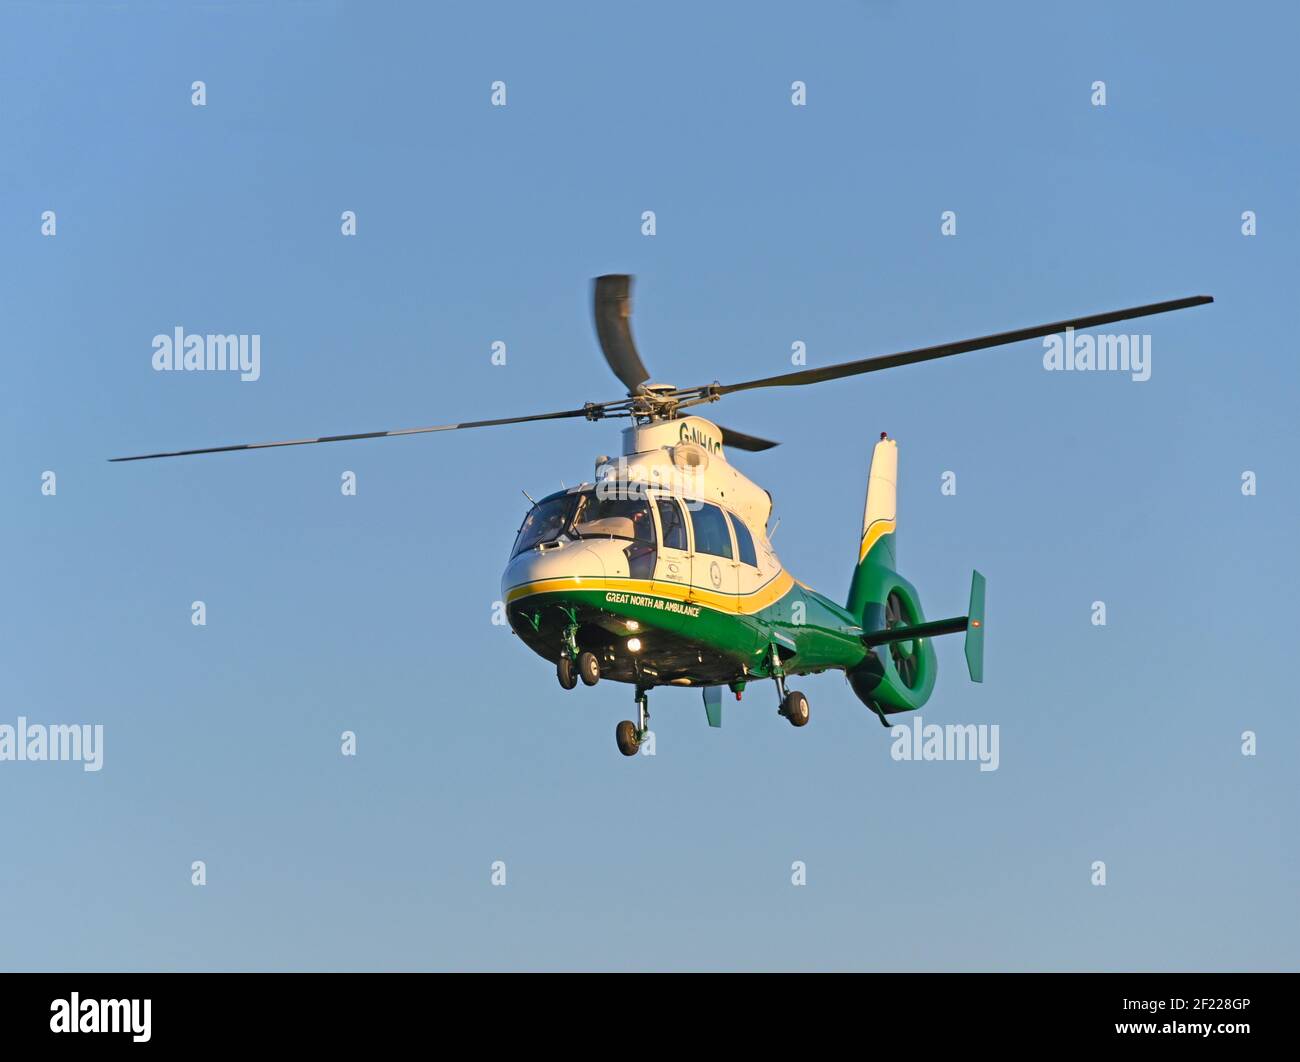 Great Northern Air Ambulance Service Helicopter, Eurocopter AS365 Dauphin N2, registrazione G-NHAC. Foto Stock